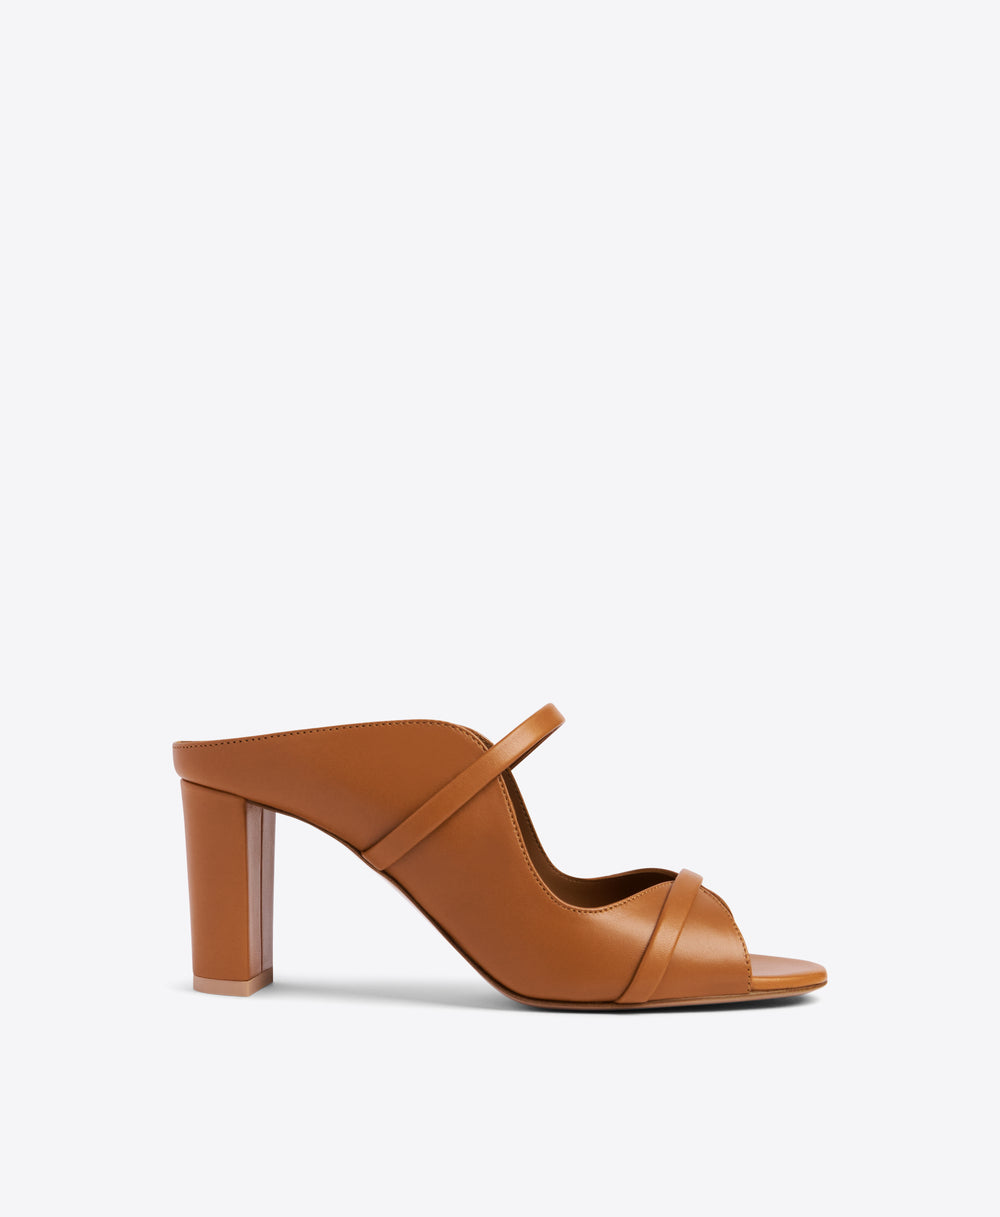 Malone Souliers Norah 70mm Brown Leather Heeled Sandals